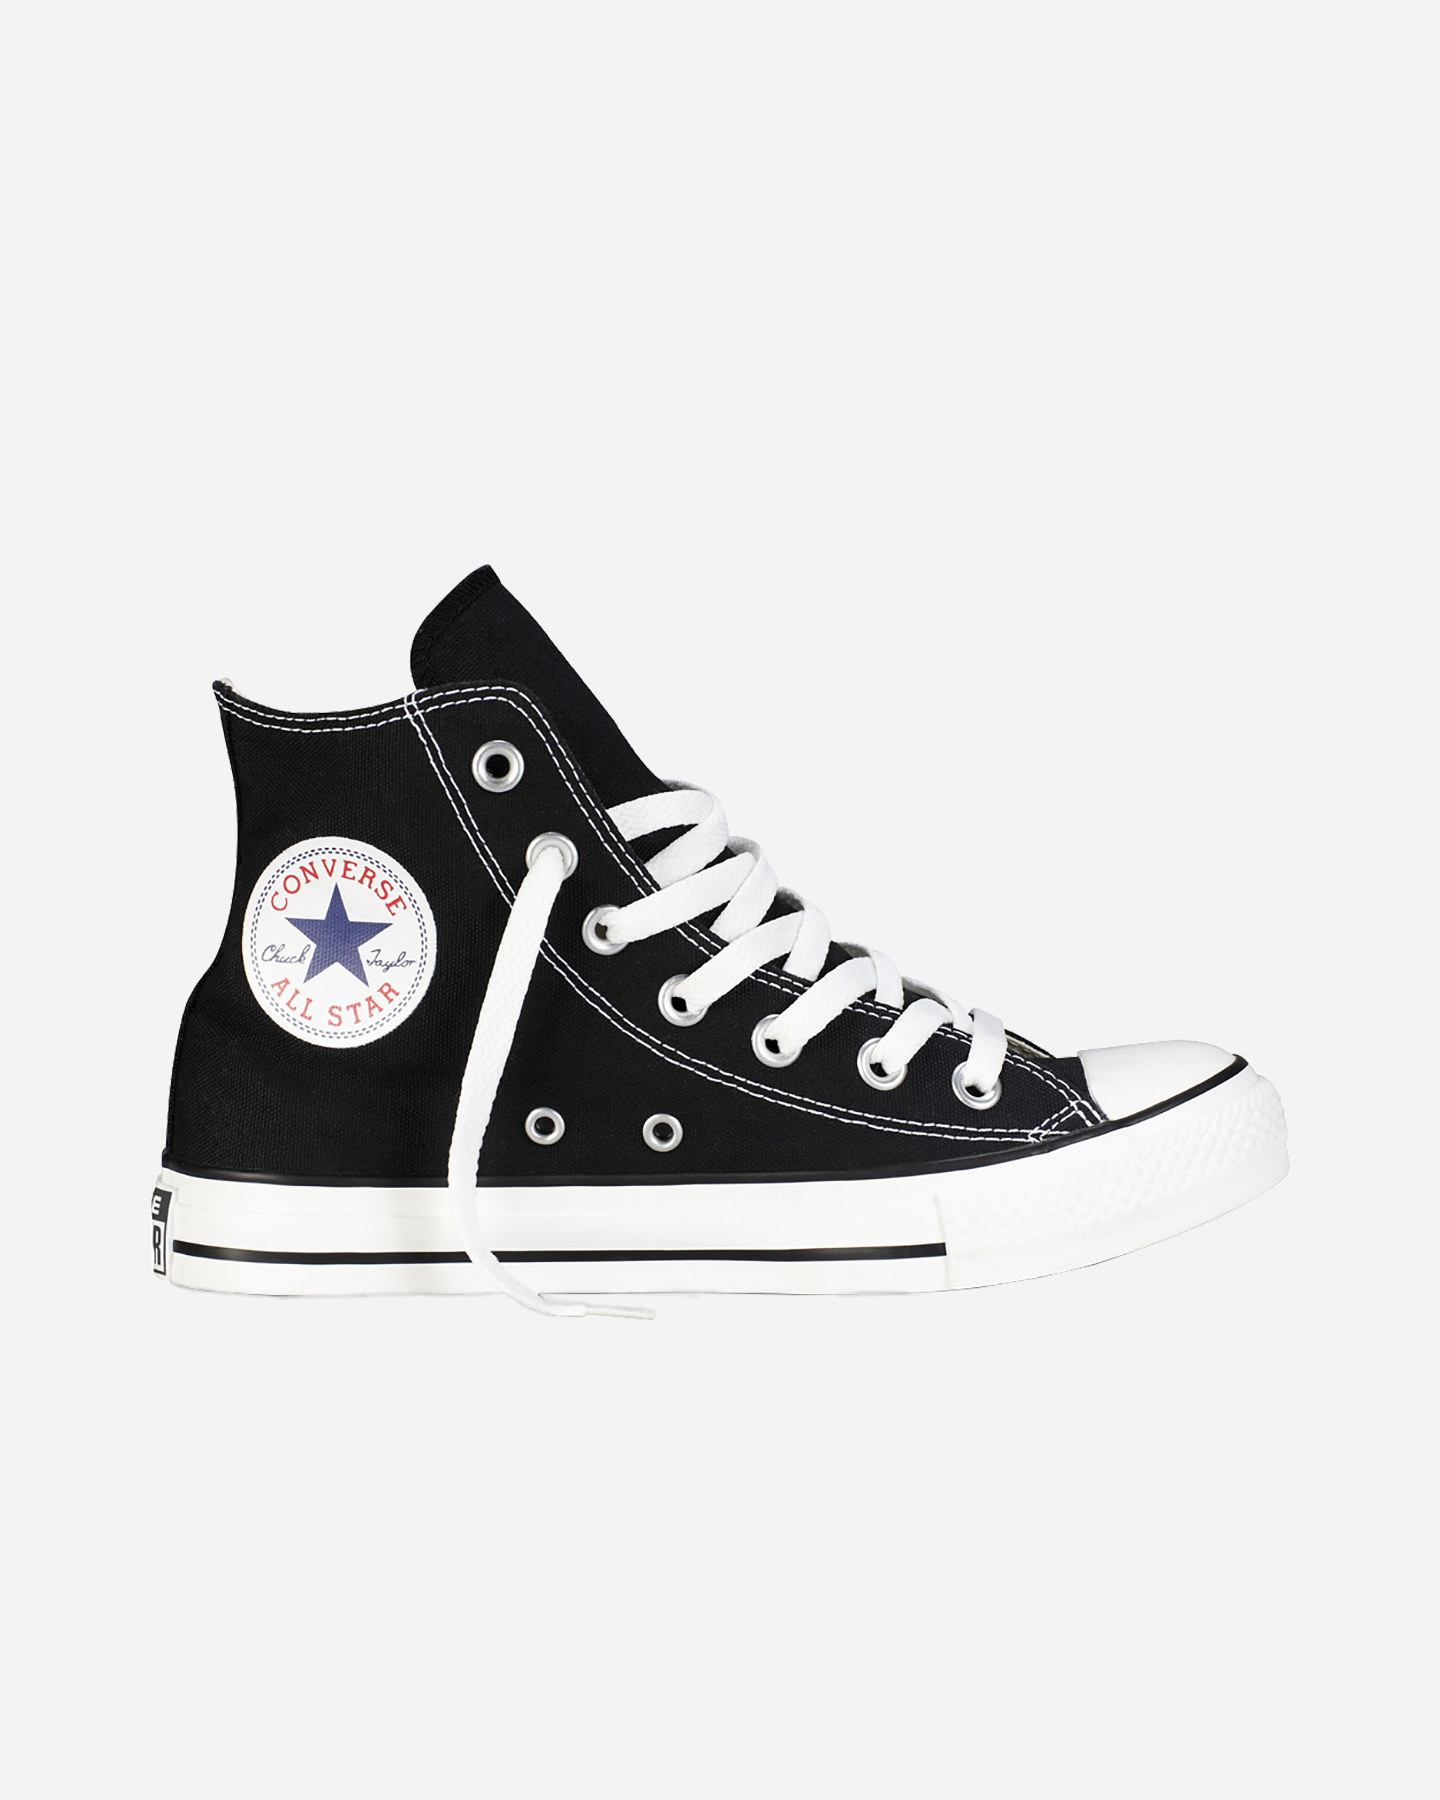 Image of Converse All Star High M - Scarpe Sneakers - Uomo